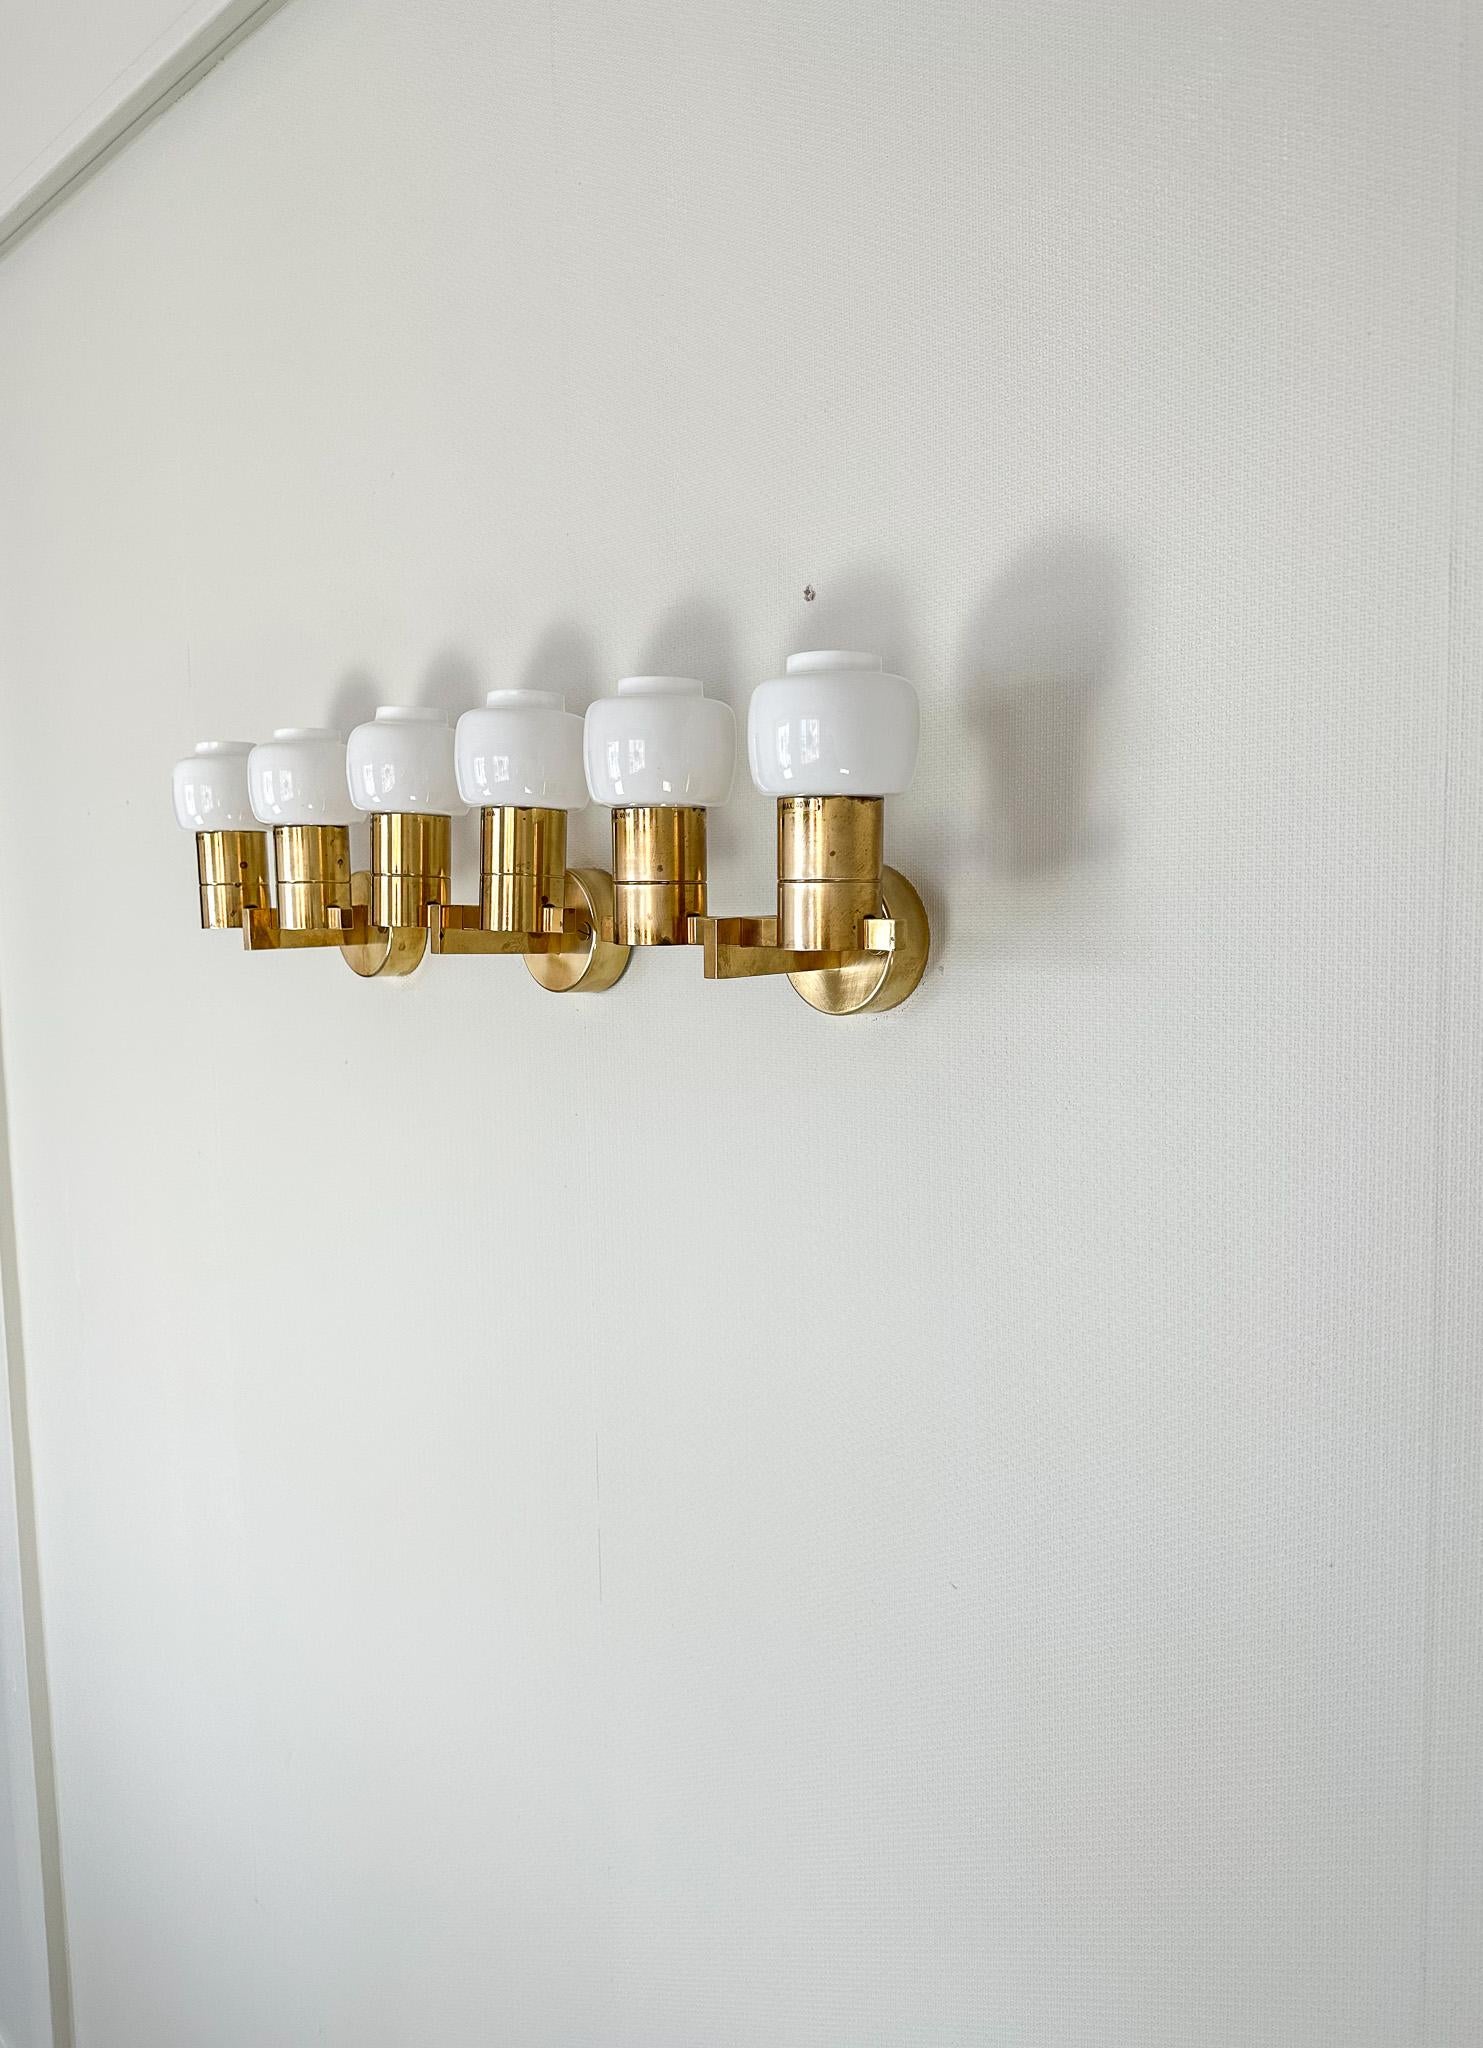 Swedish Midcentury Hans-Agne Jakobsson Brass and Opaline Glass Wall Lamps, Sweden, 1960s For Sale